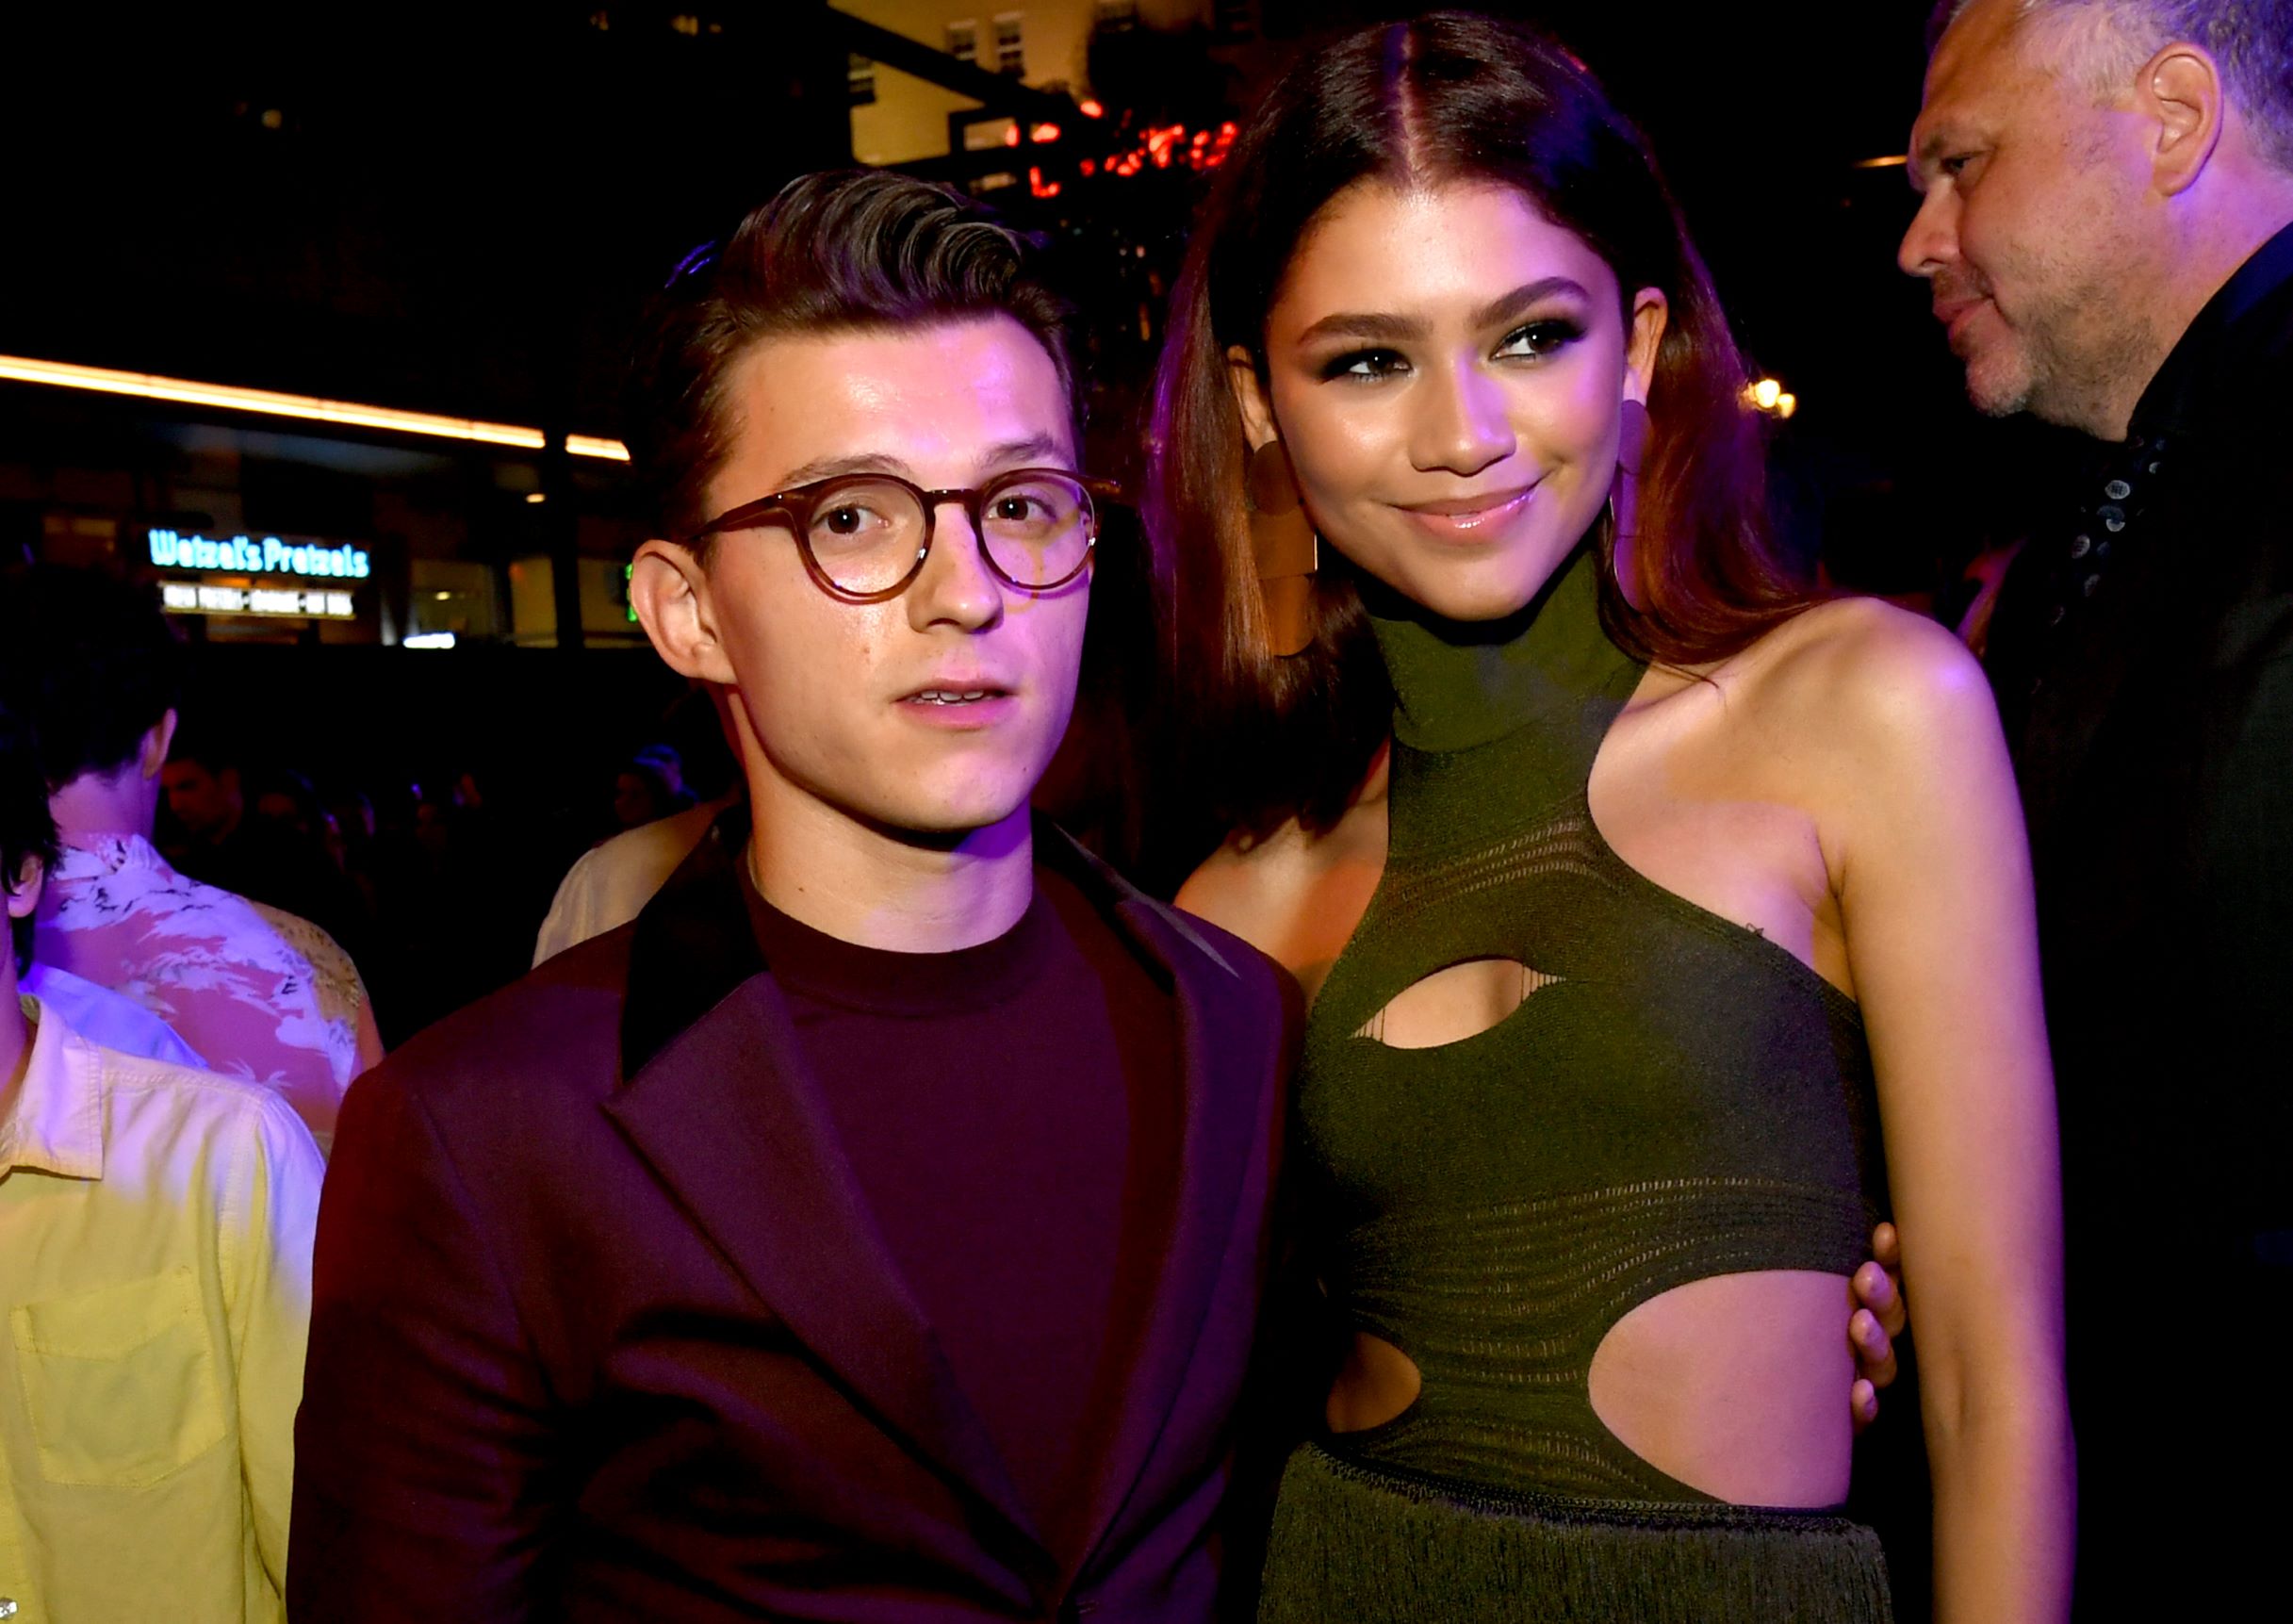 'Spider-Man No Way Home' stars Tom Holland and Zendaya at a party together